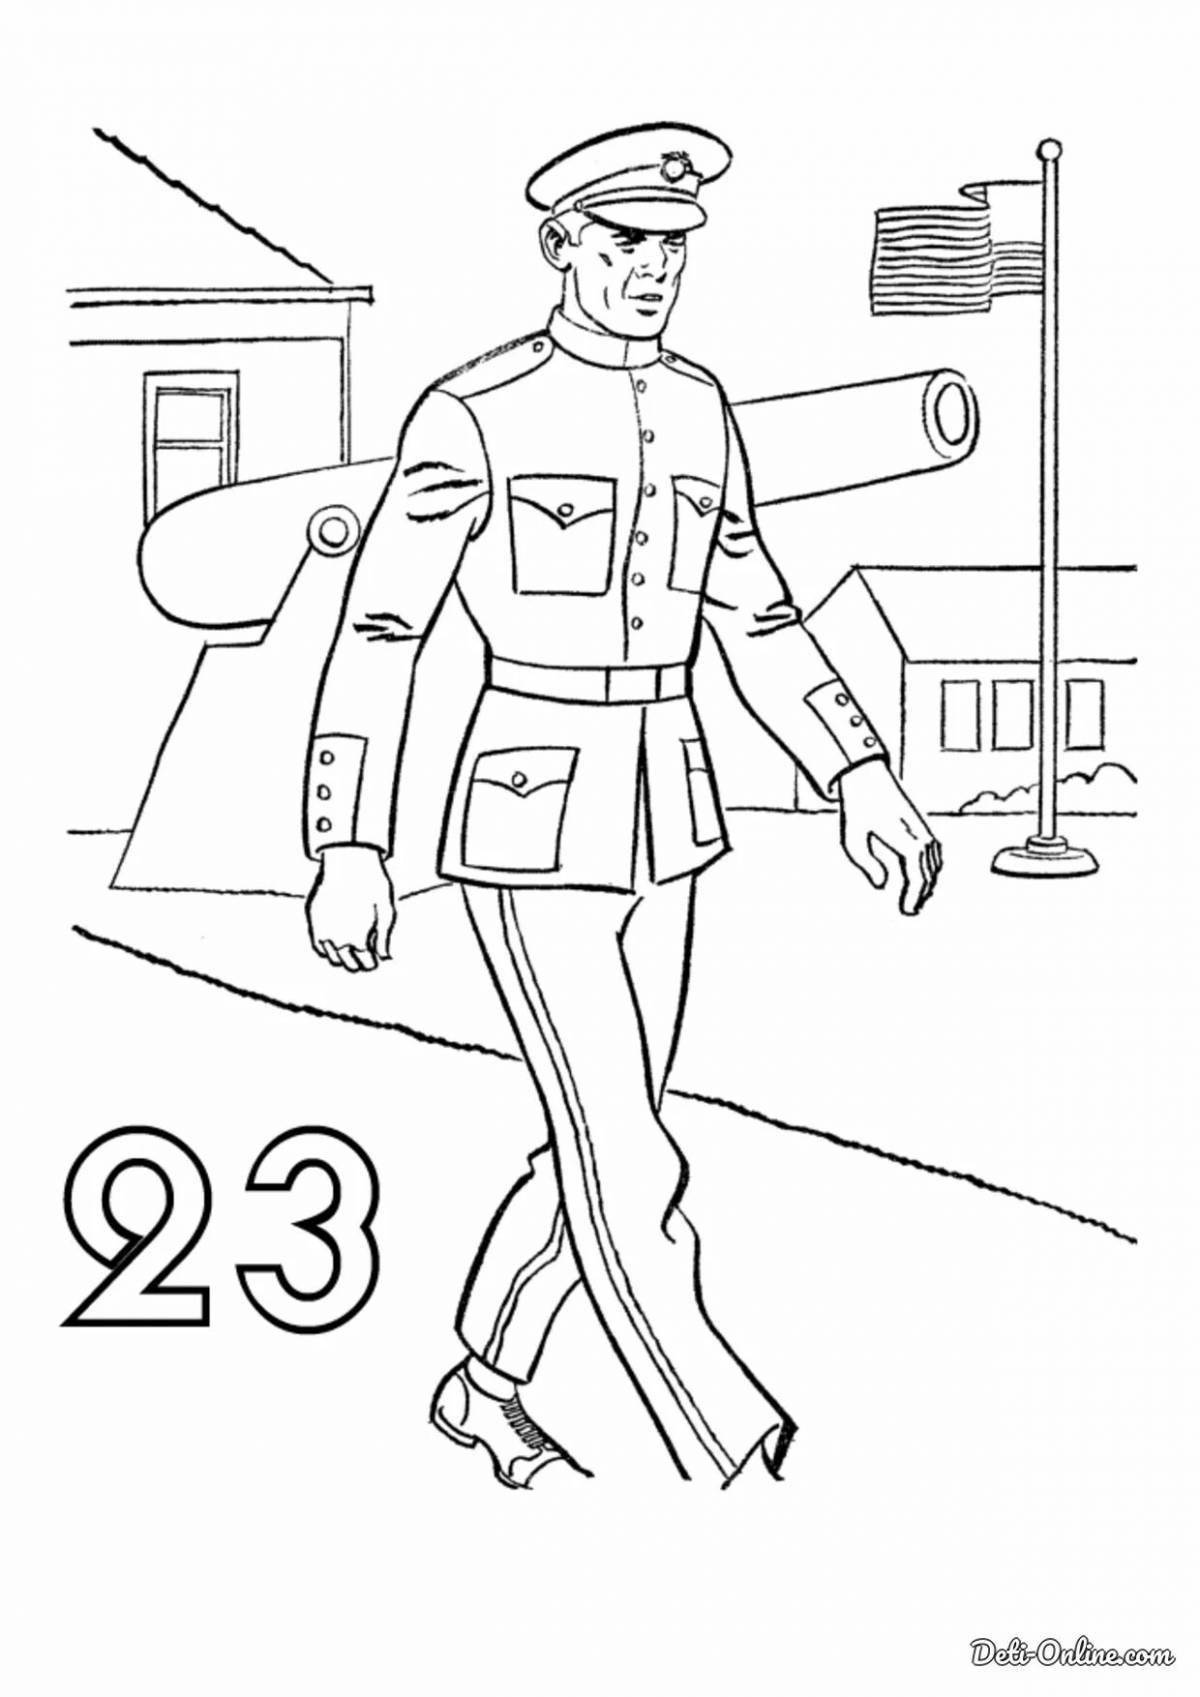 Colorful military profession coloring page